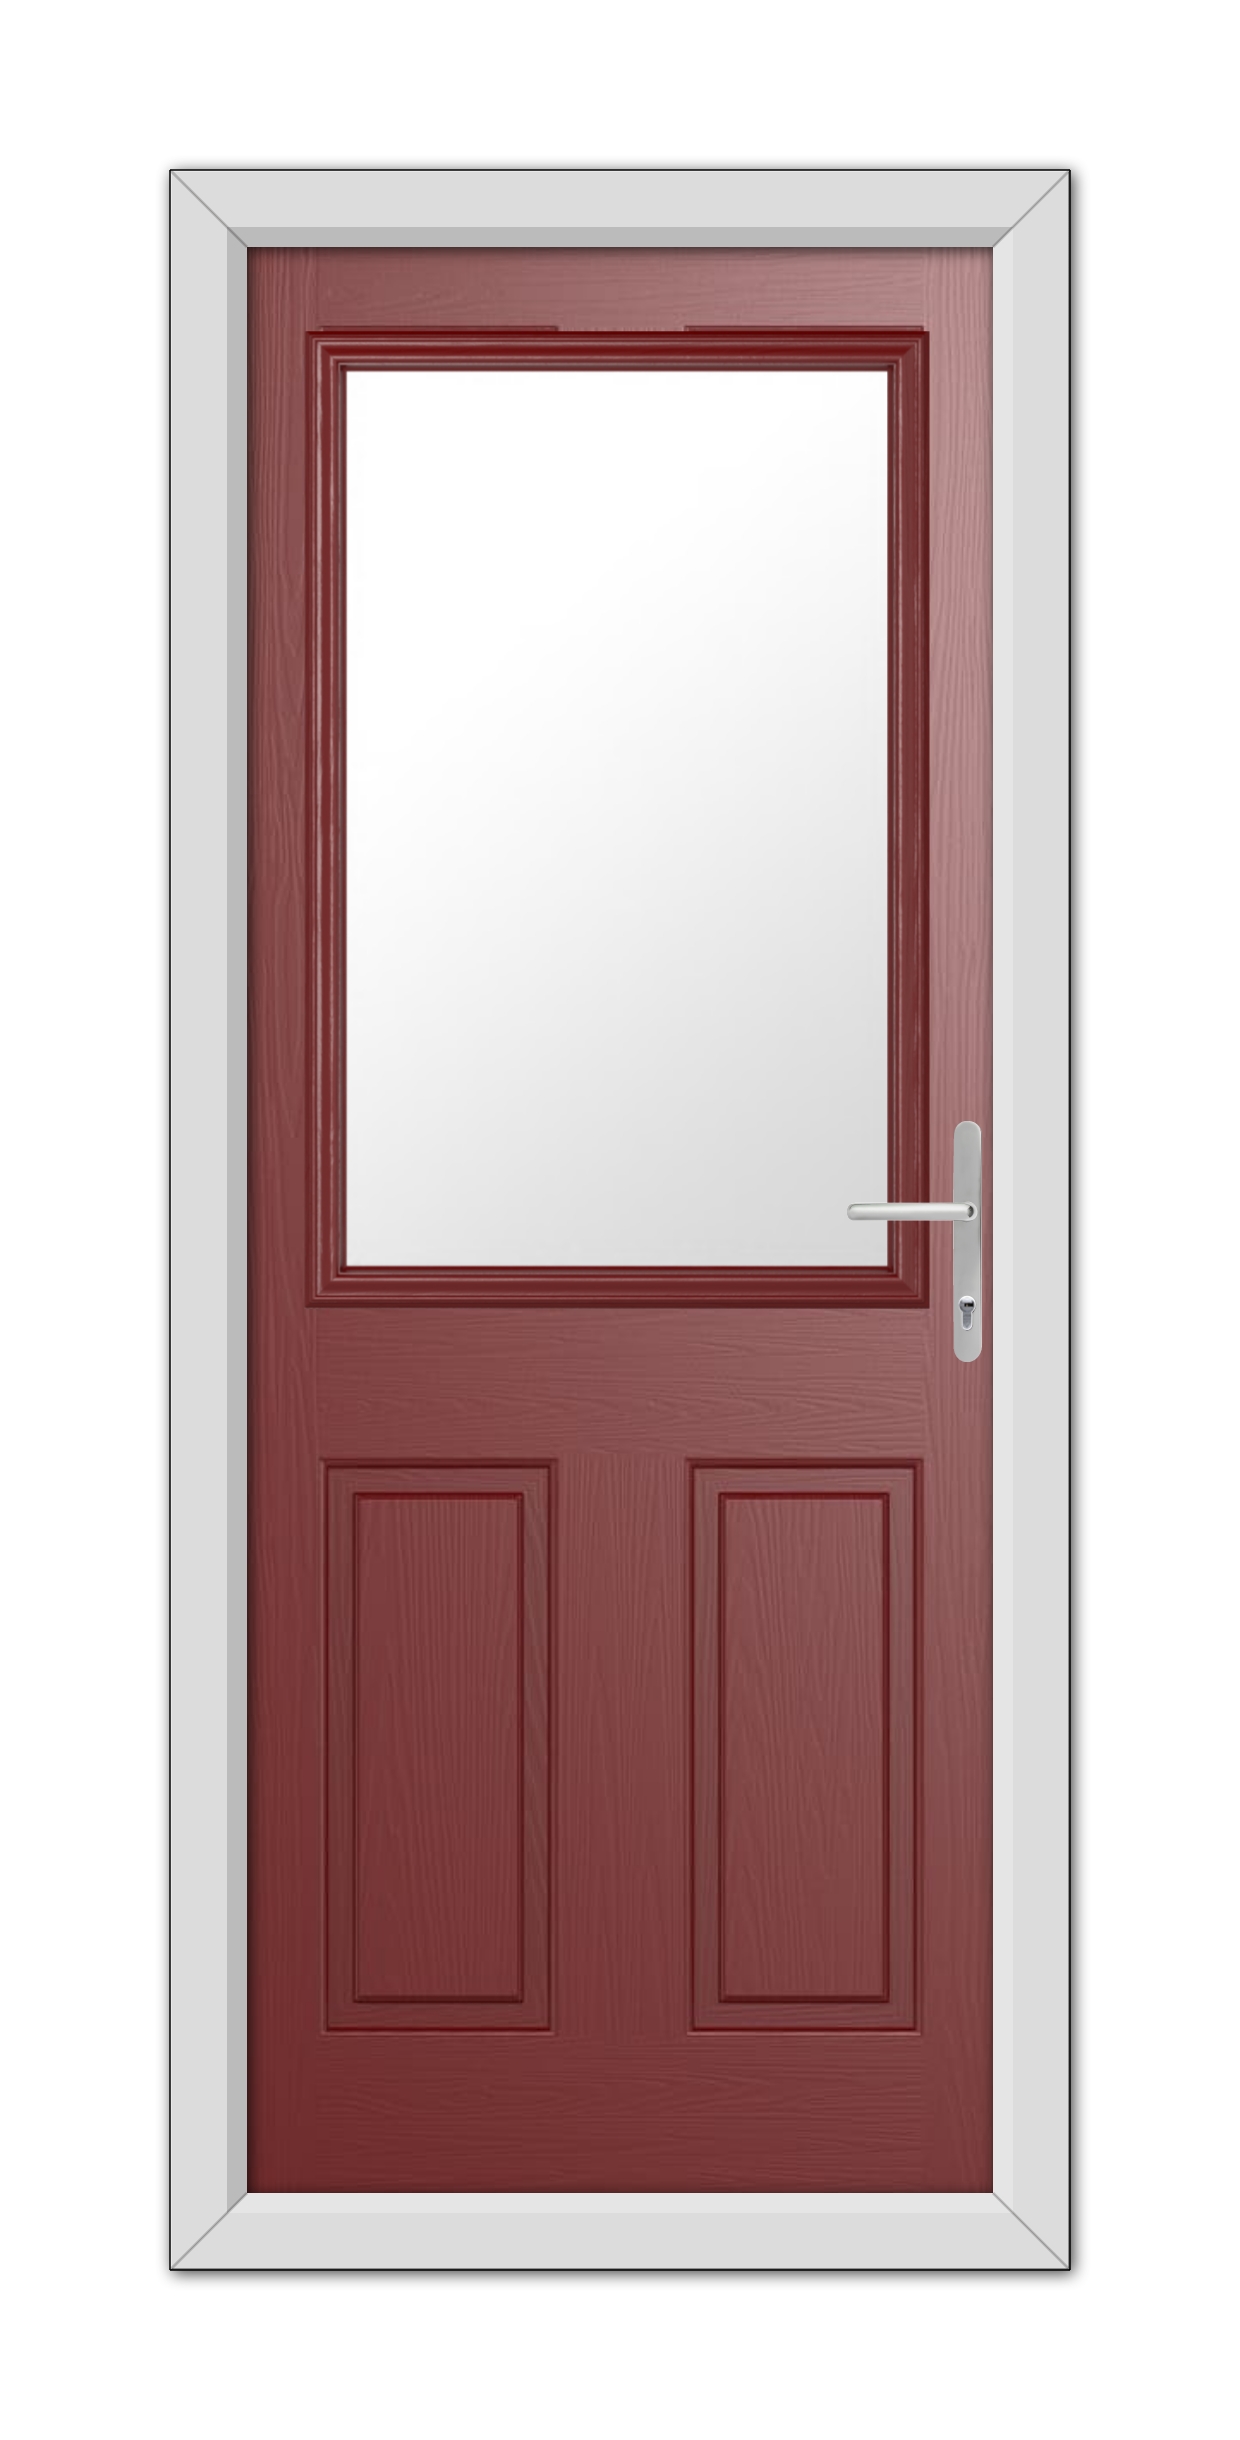 A closed Red Buxton Composite Door 48mm Timber Core featuring a central window, framed in white, with a metallic handle on the right side.